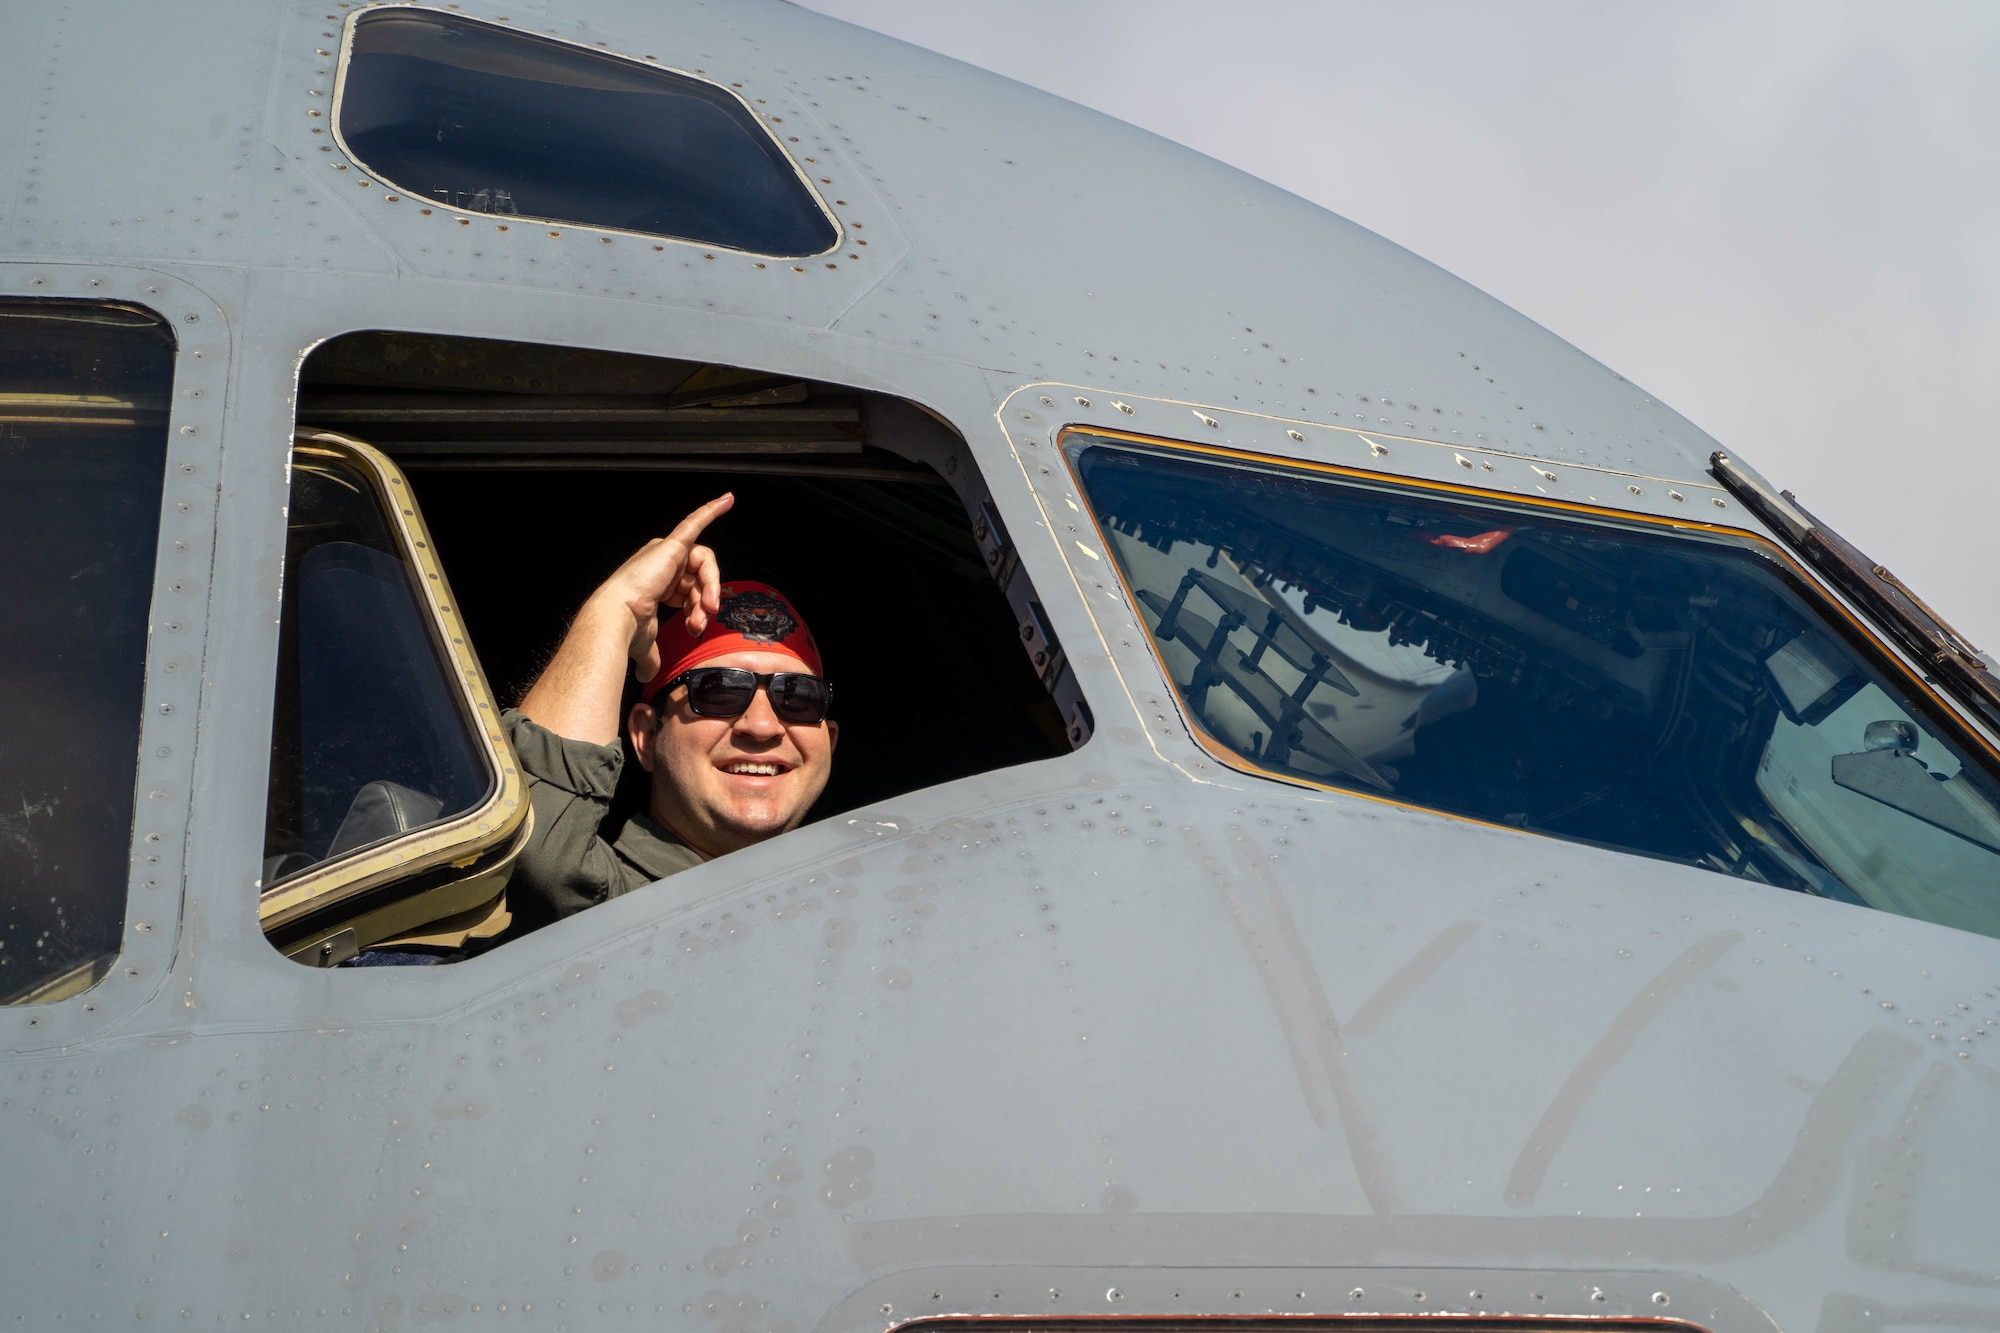 U.S. Air Force Capt. Philip Conte, 535th Airlift Squadron pilot, gestures a Hawaiian shaka from the cockpit of a C-17 Globemaster III on the flight line at Joint Base Pearl Harbor-Hickam, Hawaii, May 4, 2022. Exercise Global Dexterity is designed to prepare the U.S. Air Force and the Royal Australian Air Force for combined action in wartime, peacetime, and humanitarian operations throughout the Indo-Pacific. (U.S. Air Force photo by Airman 1st Class Makensie Cooper)